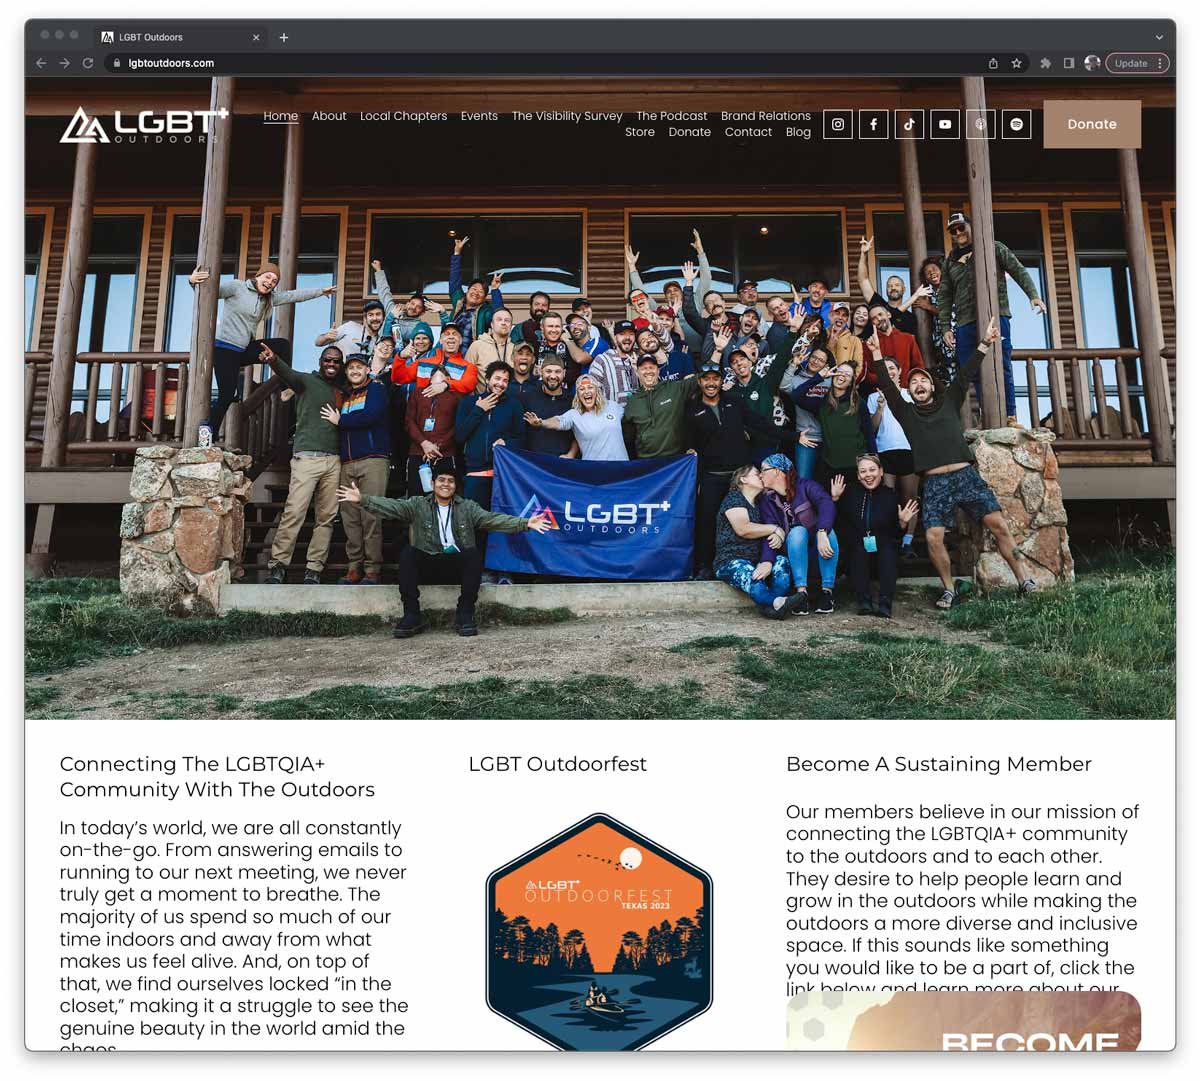 Image of LGBT+ Outdoors website homepage showing group of people on the steps of a cabin and holding up a LGBT+ Outdoors flag.